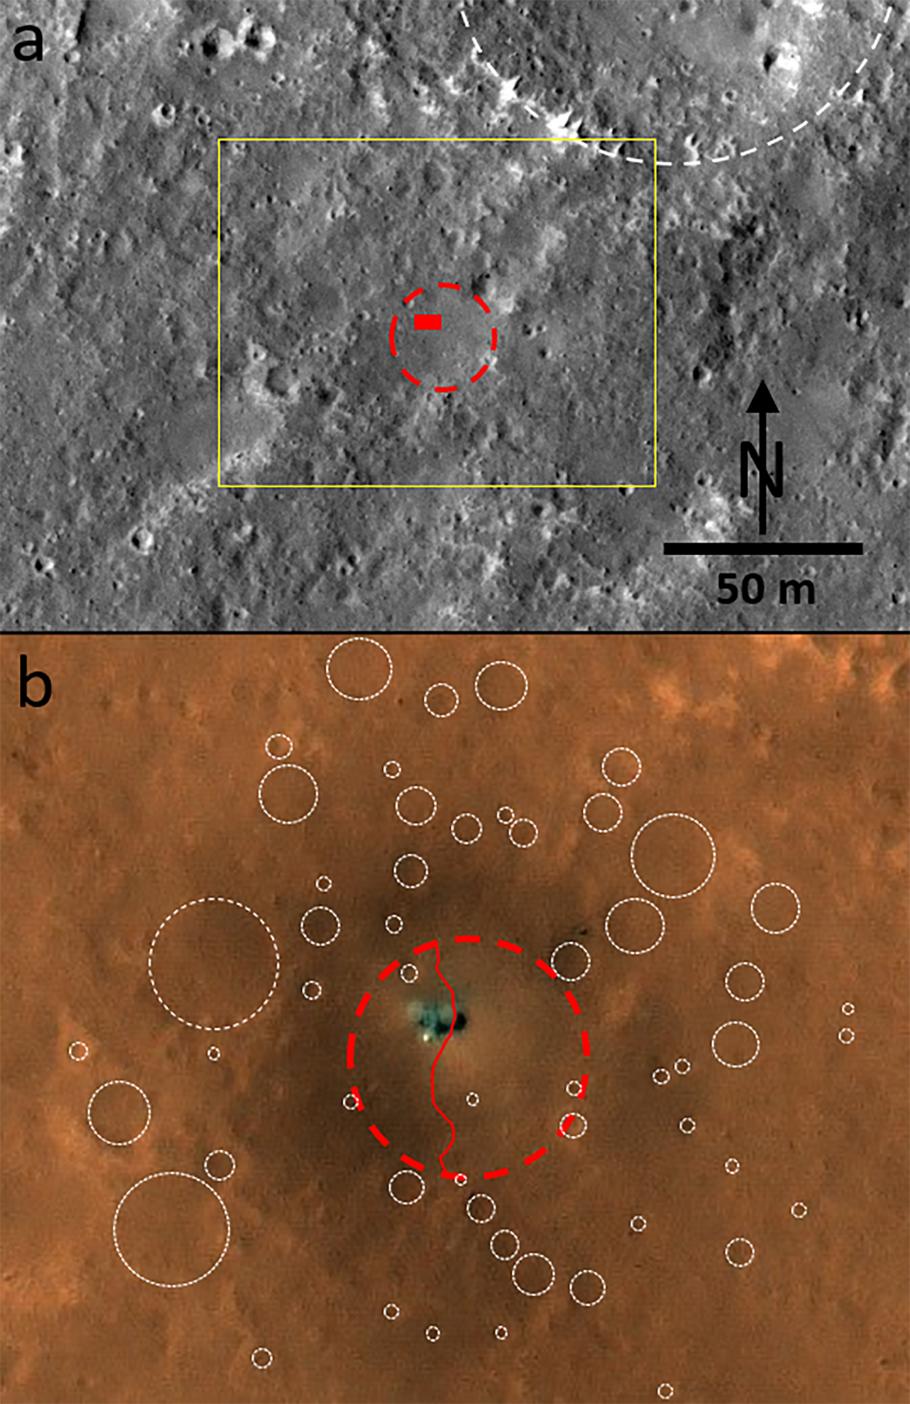 Two images stacked on top of each other. The top image is a grey topographical picture showing a red circle on a smooth patch in the center. The bottom picture is a red image with a circle around what appears to be a rover landed on Mars. 